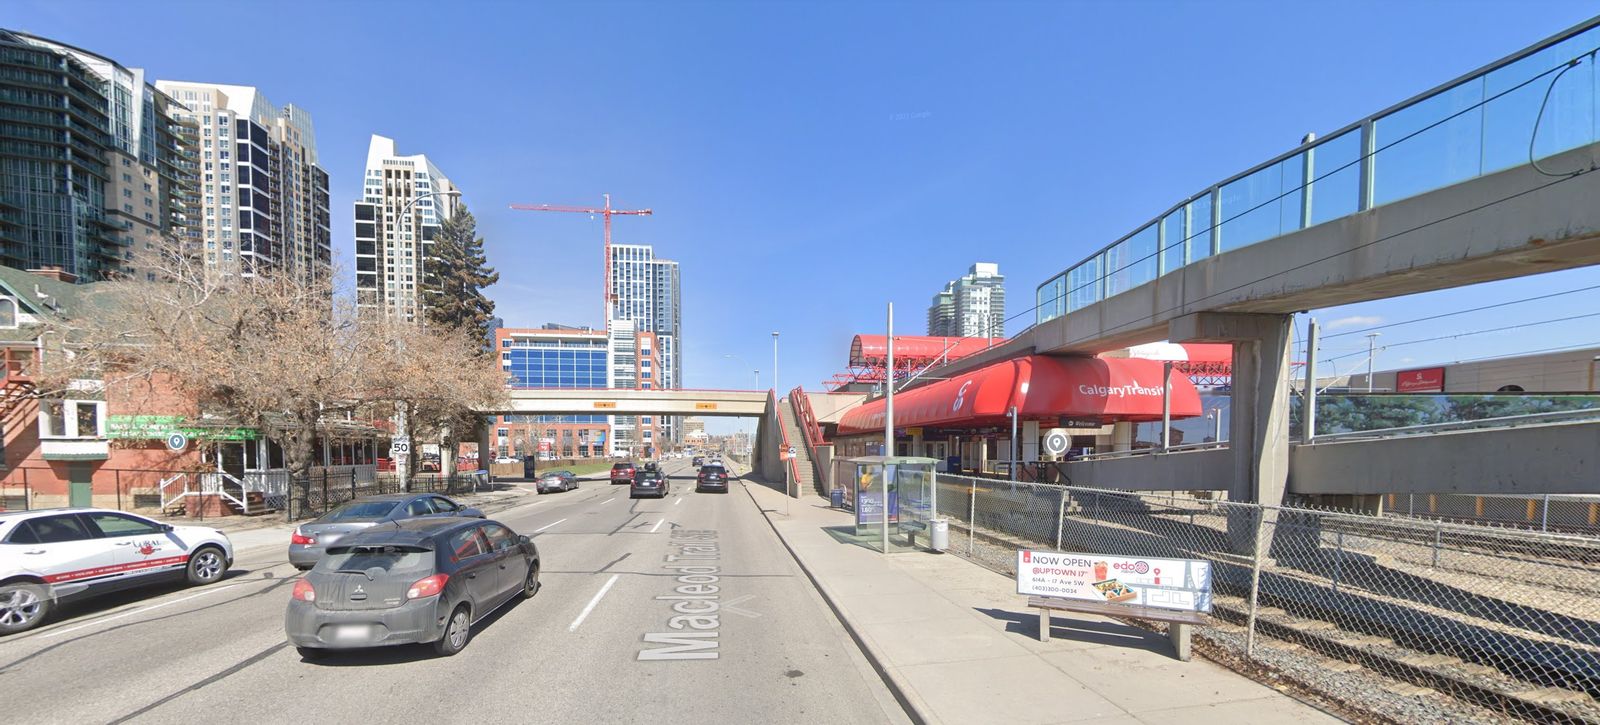 What big changes are happening to the Stampede Station in Downtown Calgary?